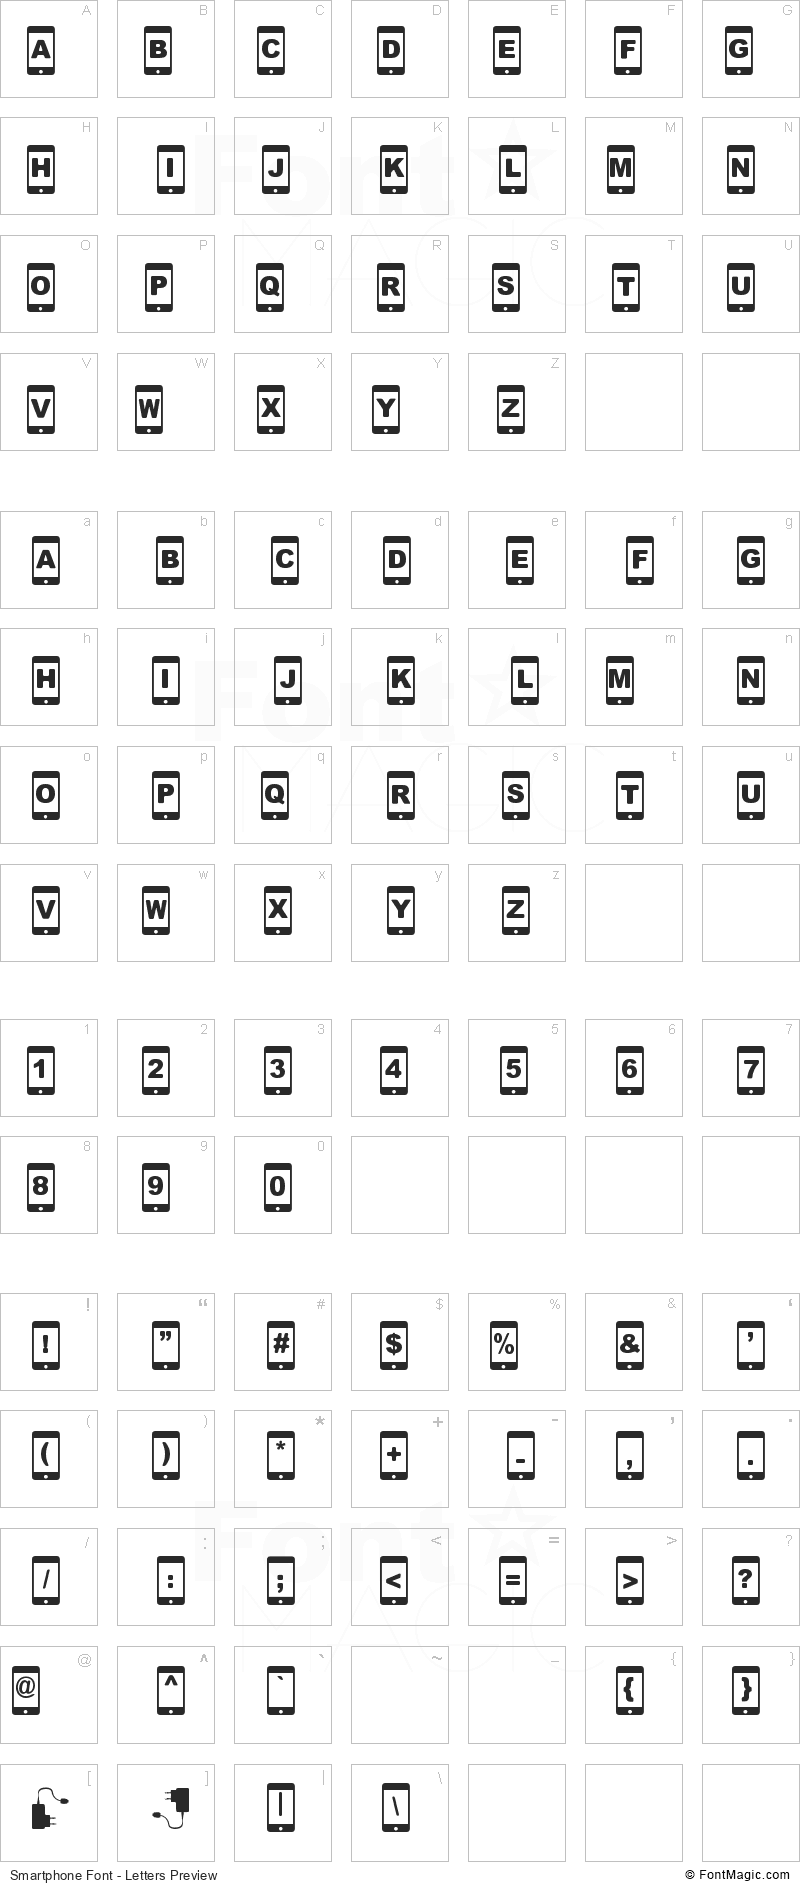 Smartphone Font - All Latters Preview Chart